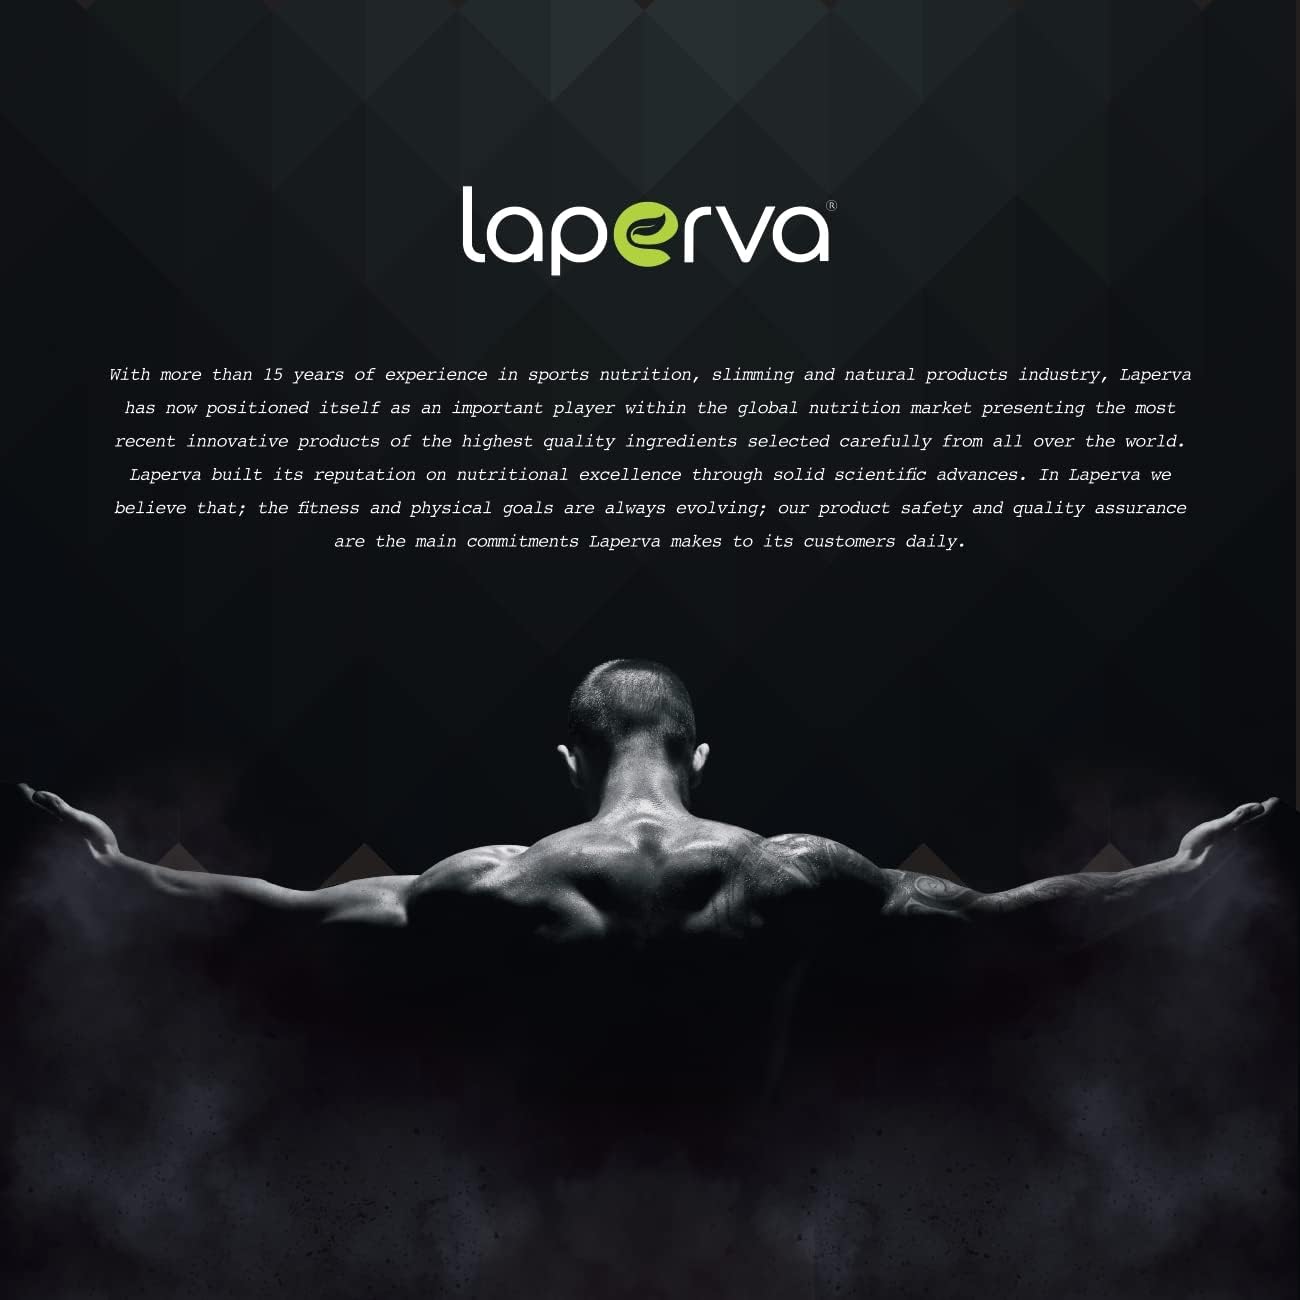 Laperva Triple Power Pre-Workout - Explosive Energy, Focus, and Performance Booster with Beta-Alanine, Creatine, and BCAAs - Enhance Stamina and Muscle Growth (Crazy Cola, 30 servings)